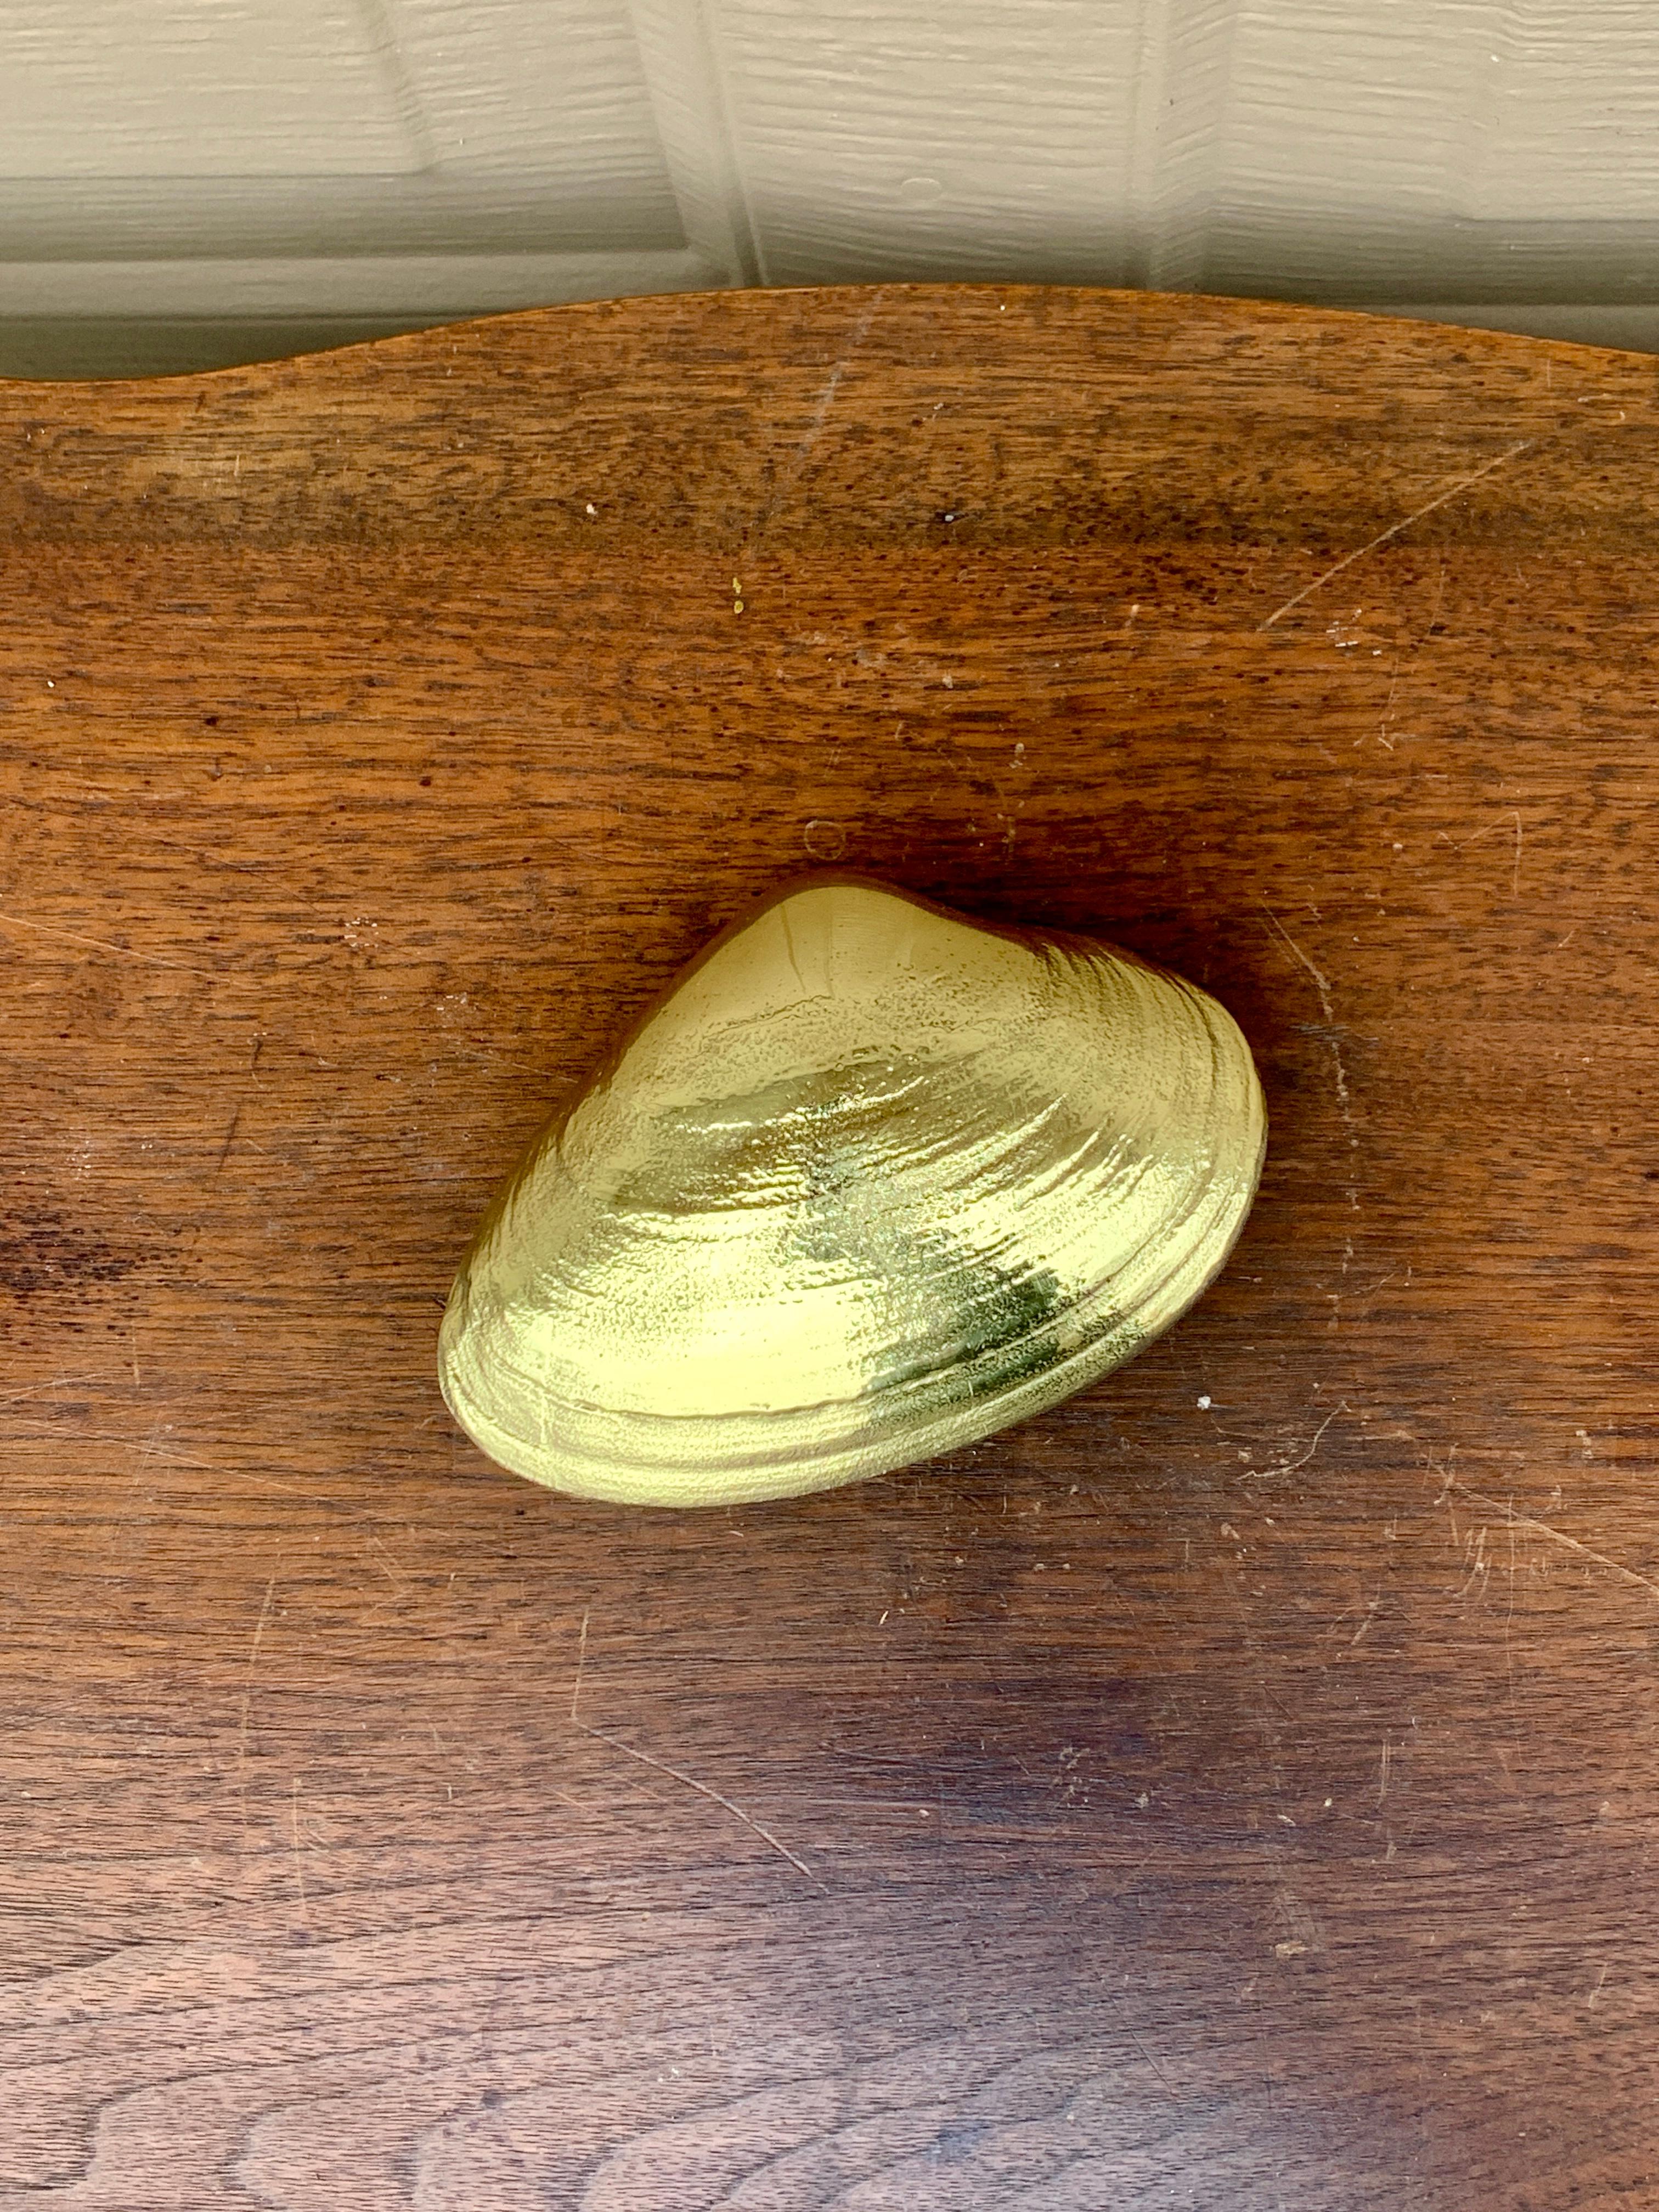 A gorgeous cast brass Quohog clam door knocker, perfect for your Nantucket, Cape, or Hamptons home! This piece was designed by Michael Healy, an accomplished Rhode Island artisan. Michael grew up on Cape Cod and has happy memories of his youth spent